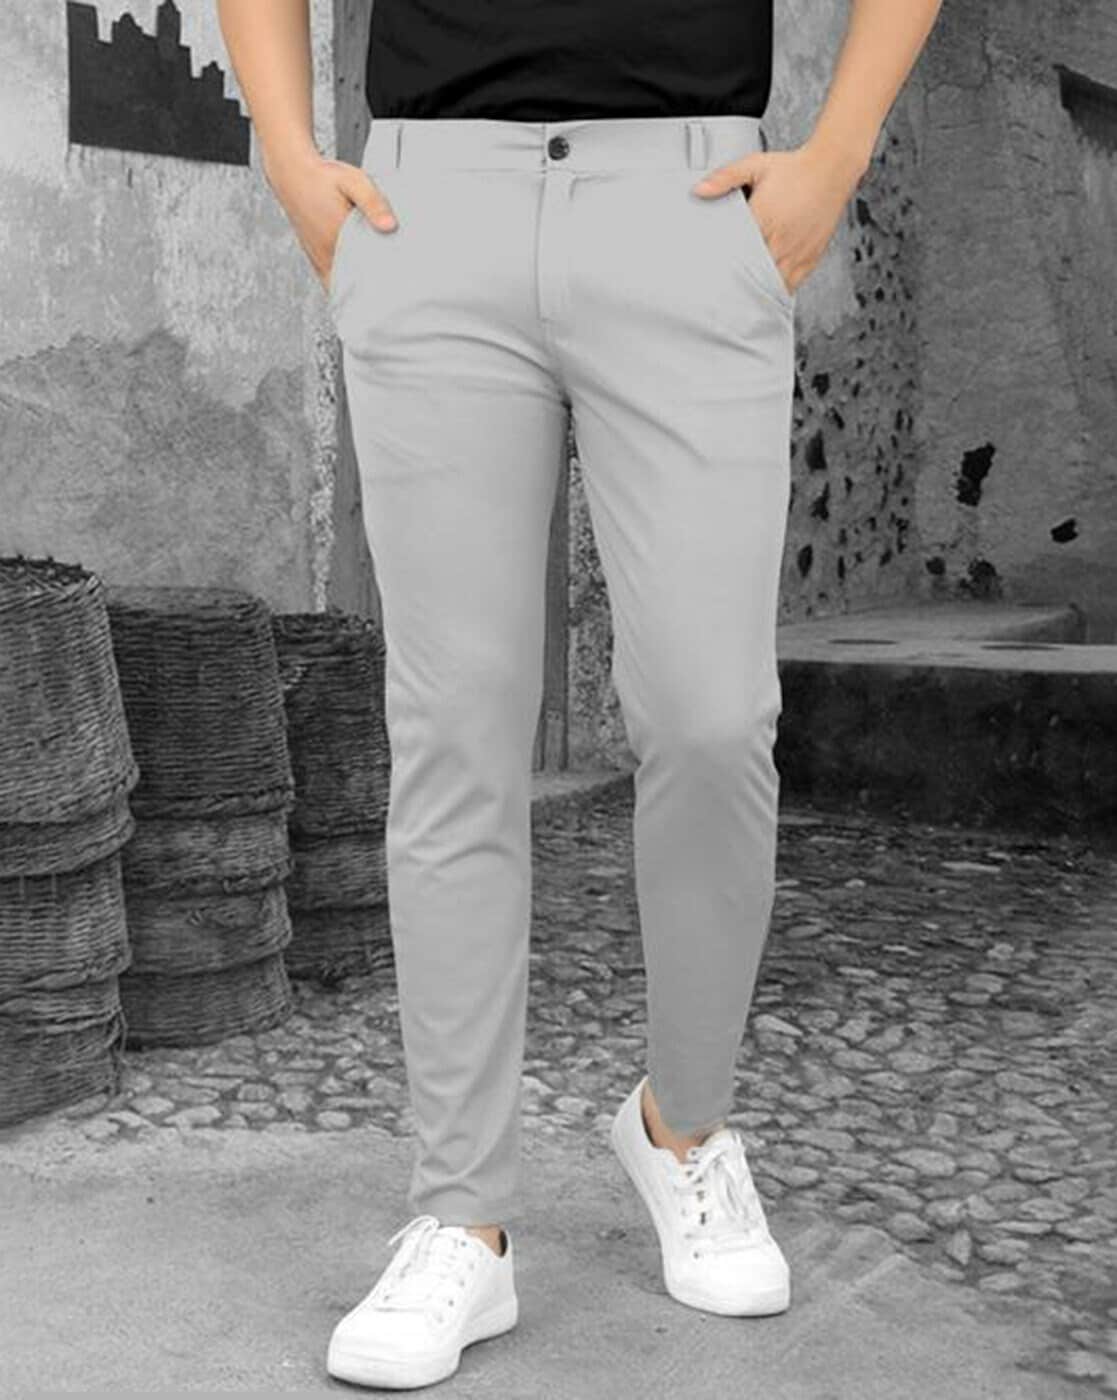 5 Trendy Printed Pant looks Men Should Try Out This Season | Mens fashion  inspiration, Mens fashion suits, Mens fashion casual outfits